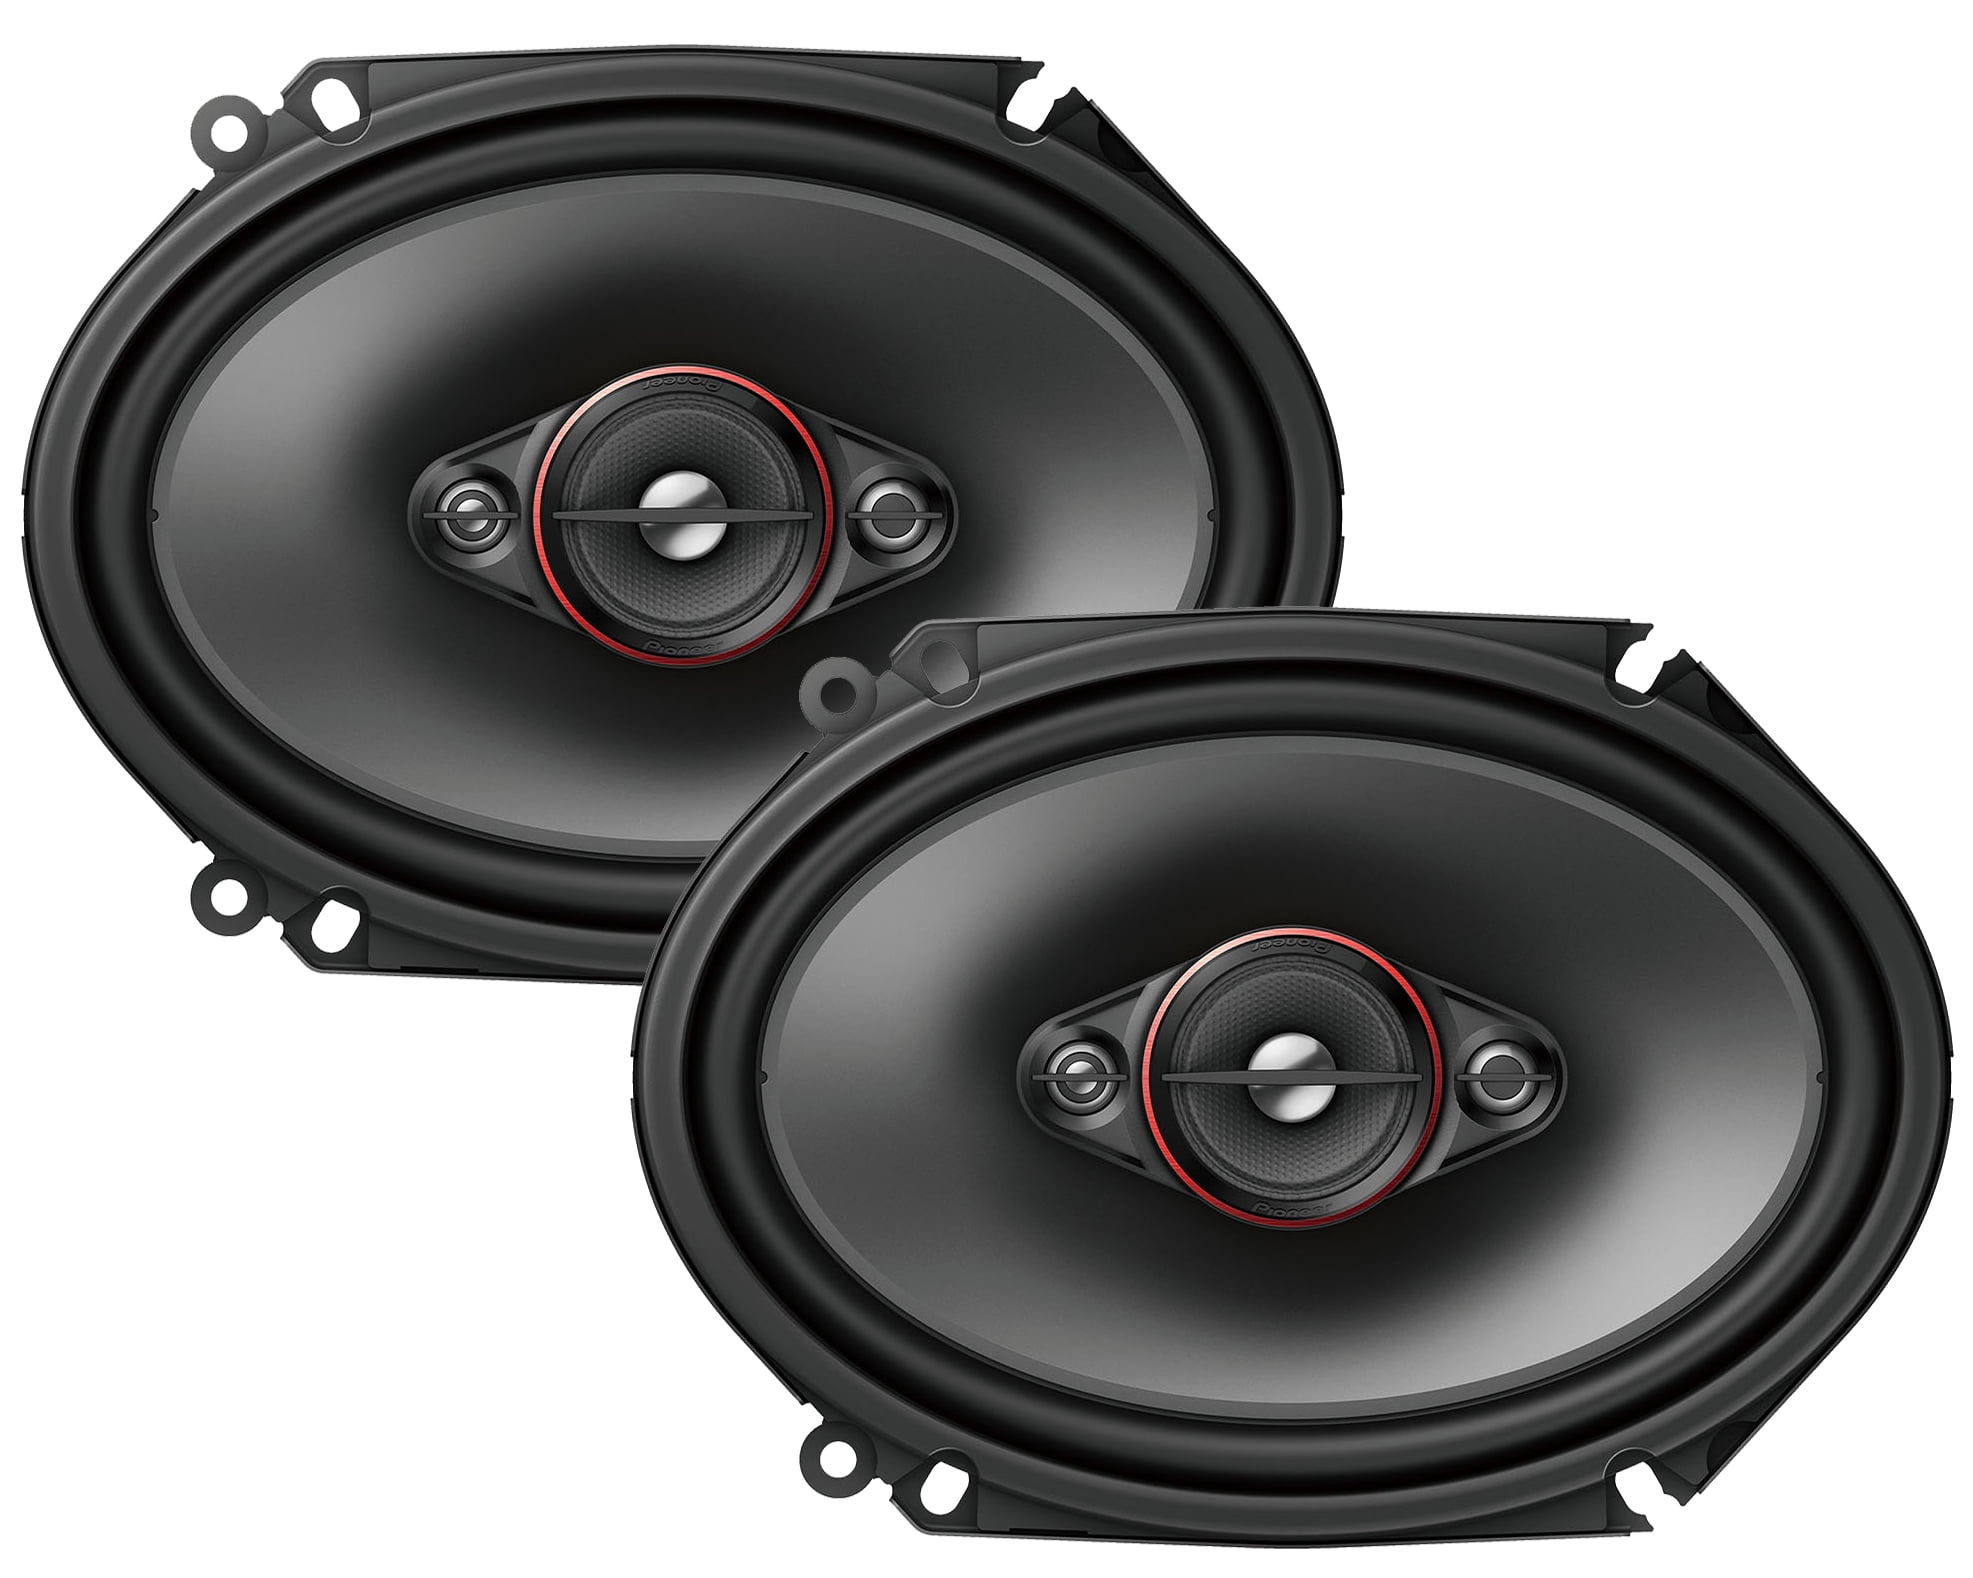 Pioneer TS-800M 6" x 8" - 4-way 350 W Max Power | 11mm Tweeter and 11mm Super Tweeter and 1-5/8" Cone Midrange | Coaxial Speakers (Sold in Pairs)